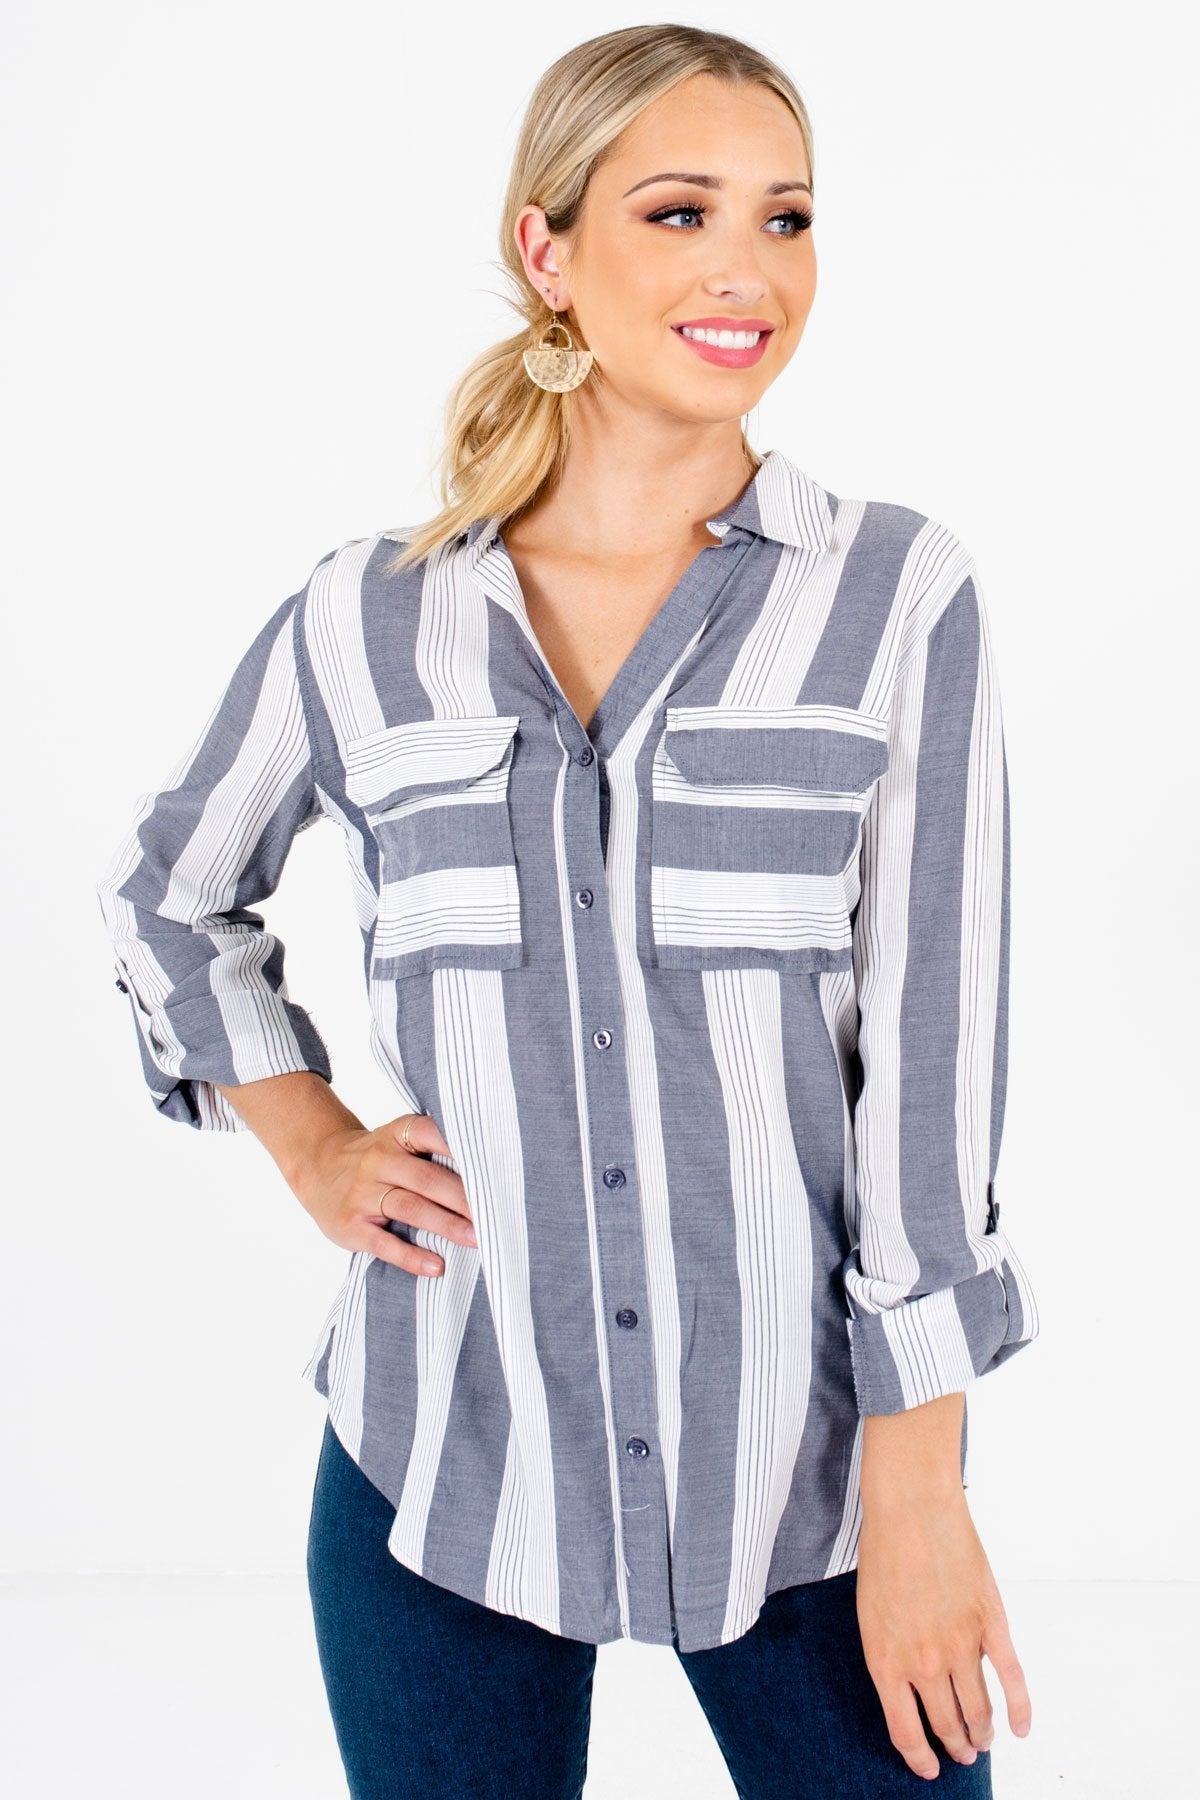 Blue and White Stripe Patterned Boutique Shirts for Women